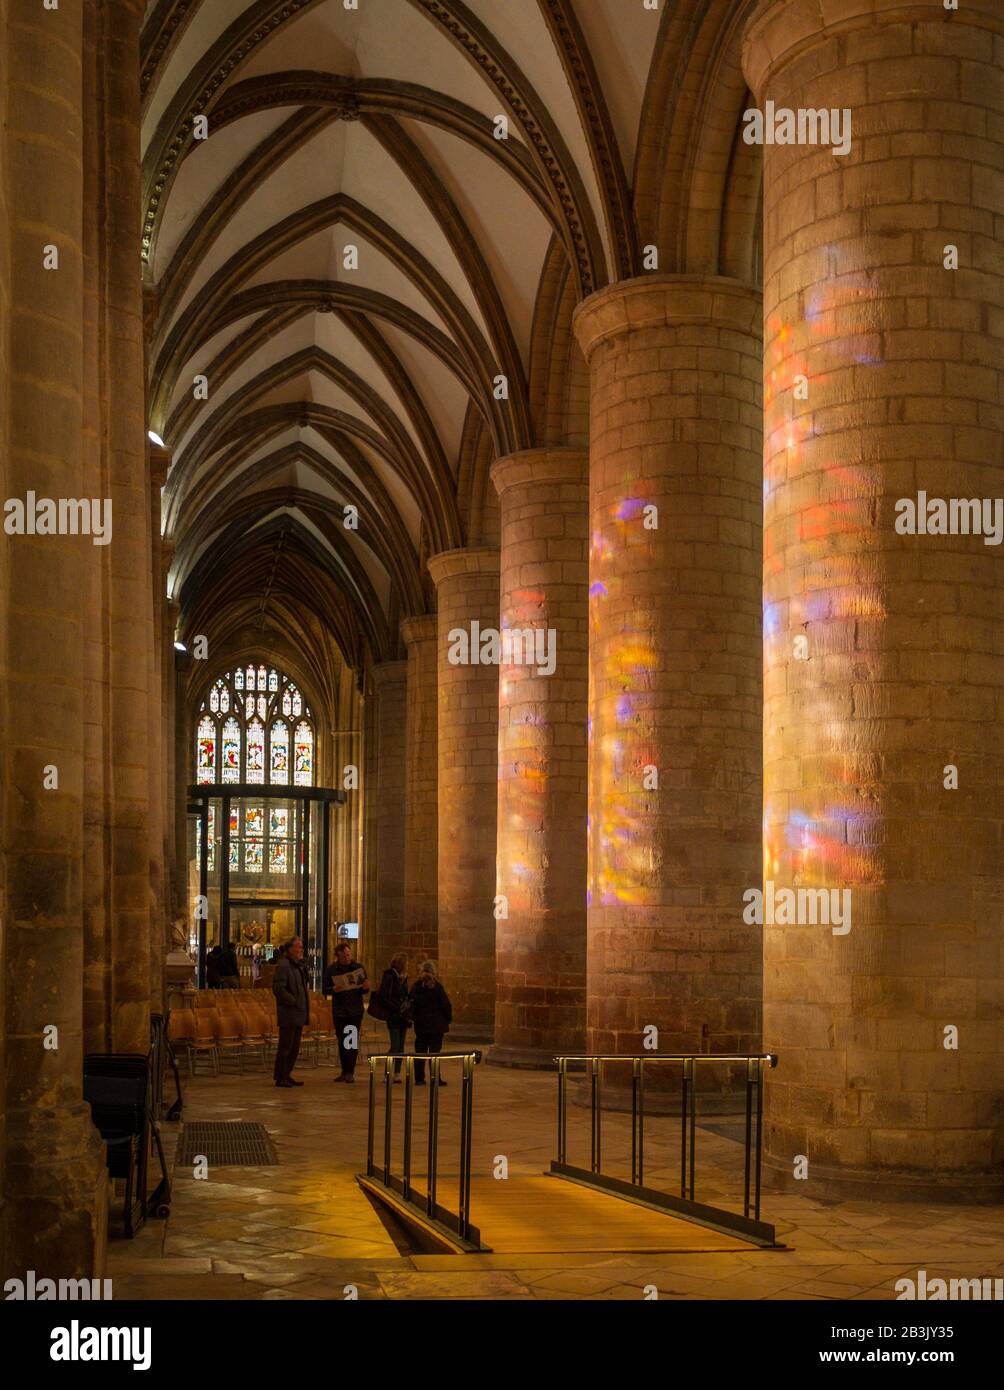 Sunlight floods through stained glass windows onto the main piers in Gloucester Cathedral. Stock Photo